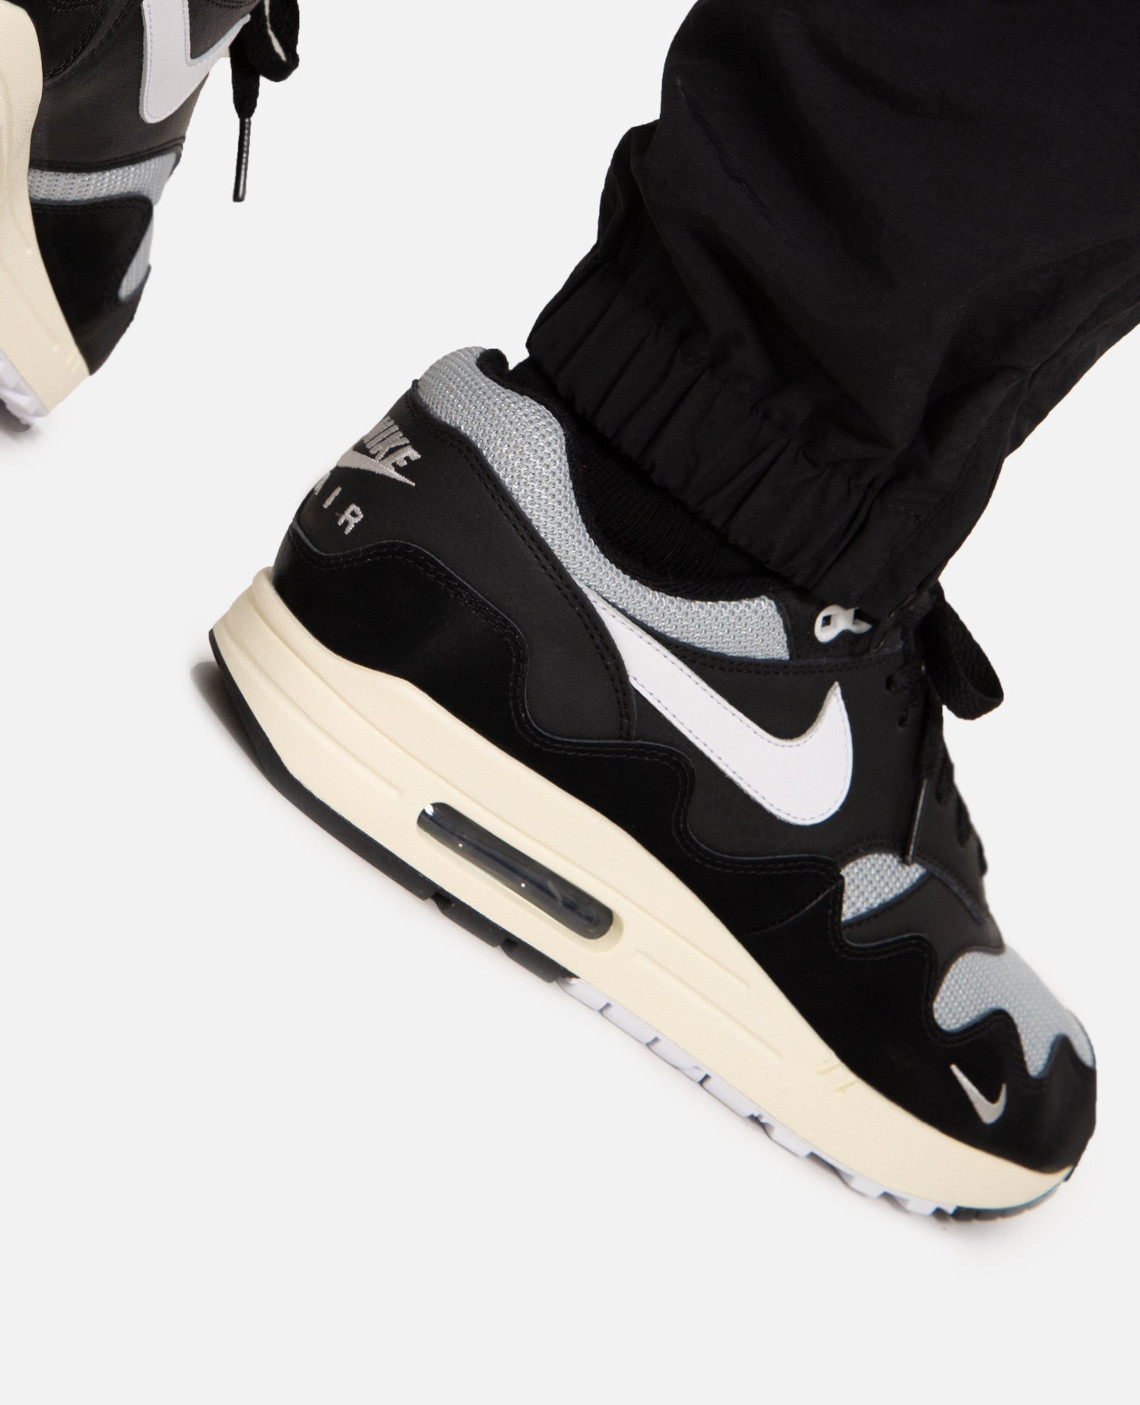 Patta's Nike Air Max 1 Waves Is Dropping In Black - Sneaker News